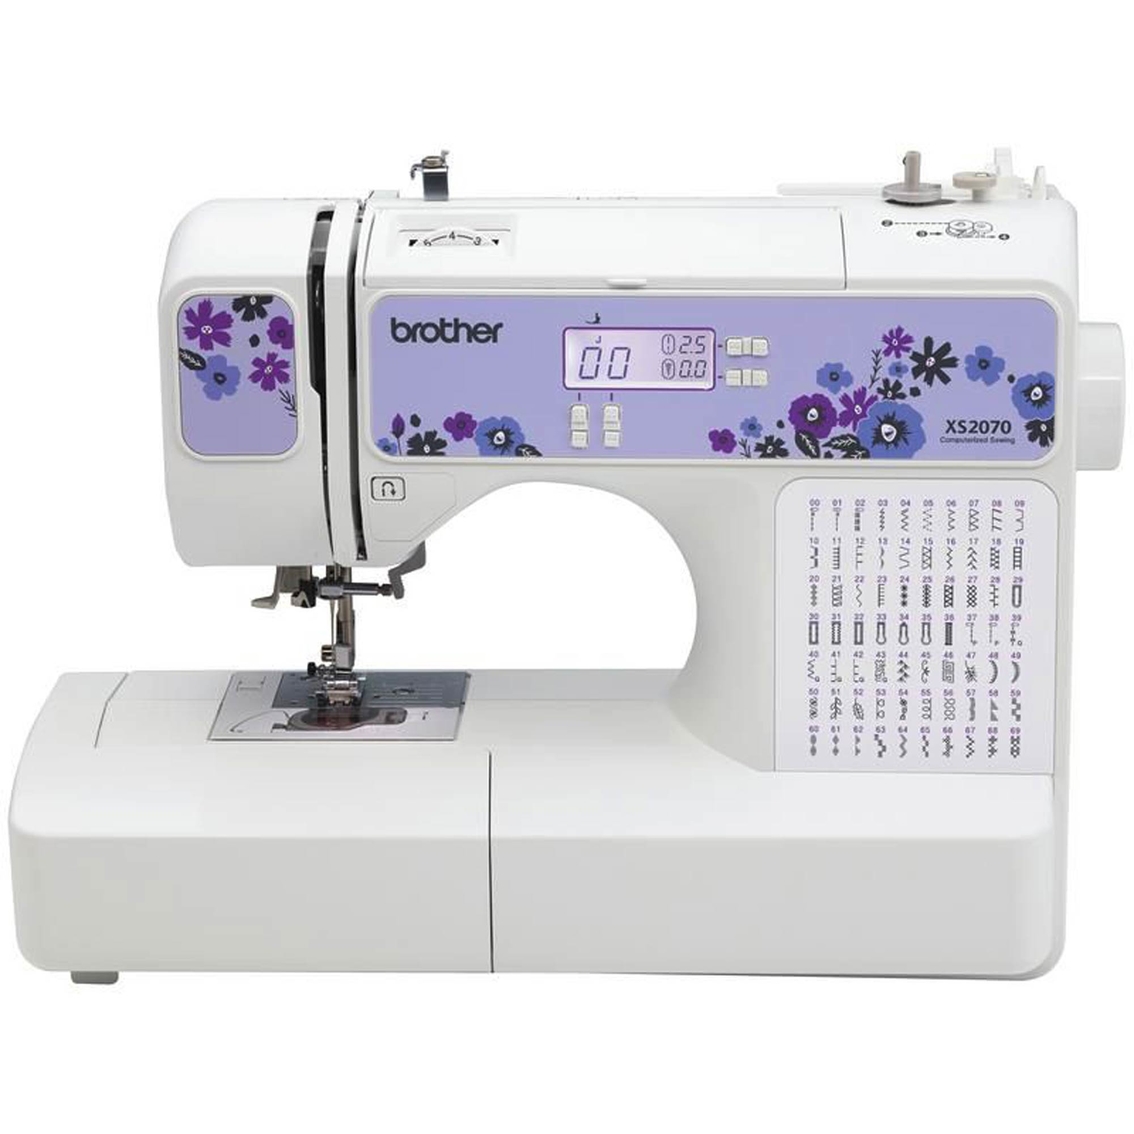 Sewing Starter Kit - Brother XR9550 Computerized Sewing Machine